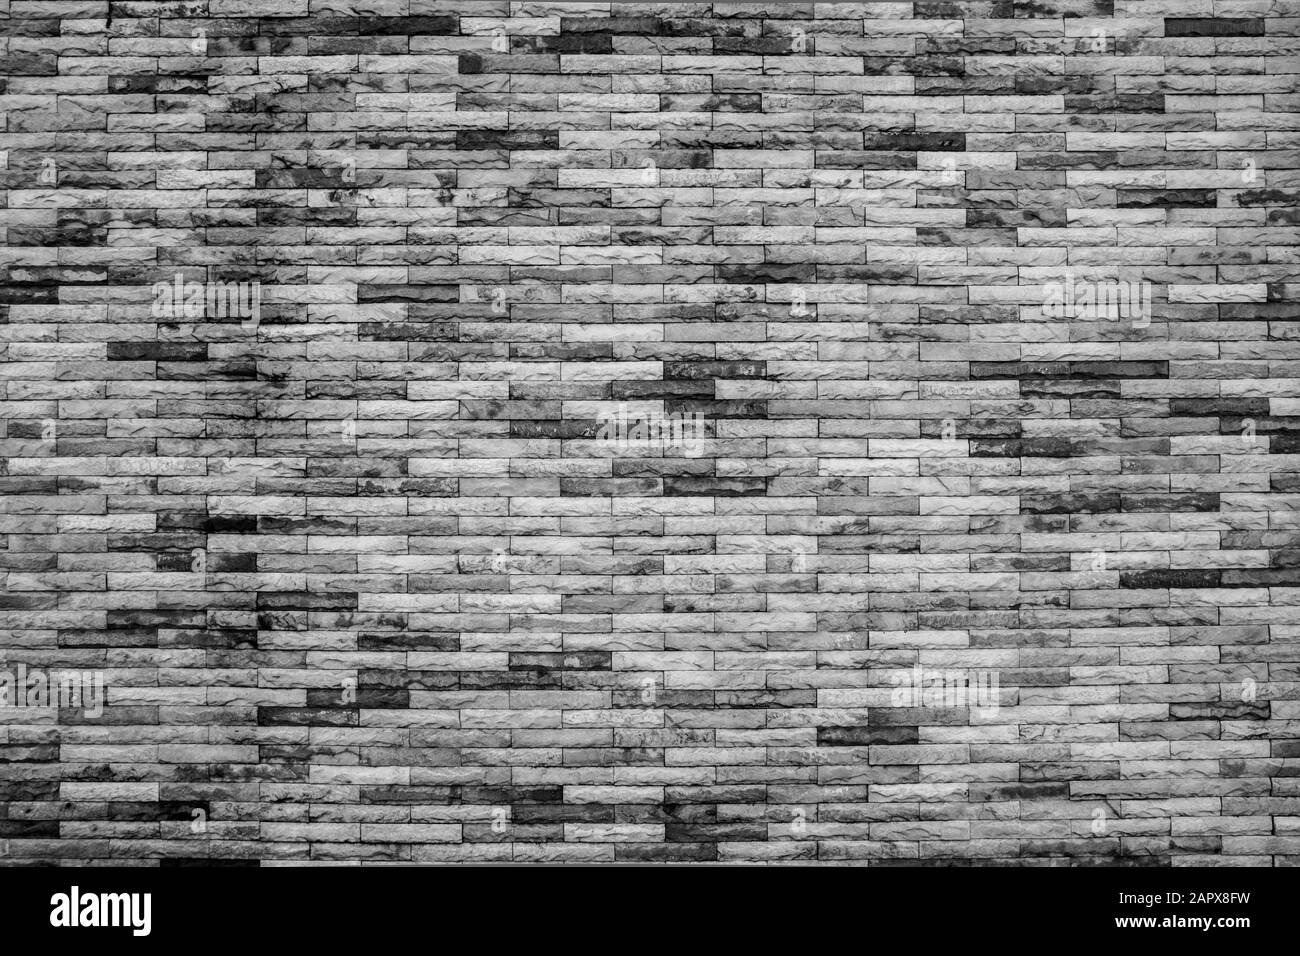 Abstract Brick Wall Patterns in Black and White as Background or Textures Stock Photo